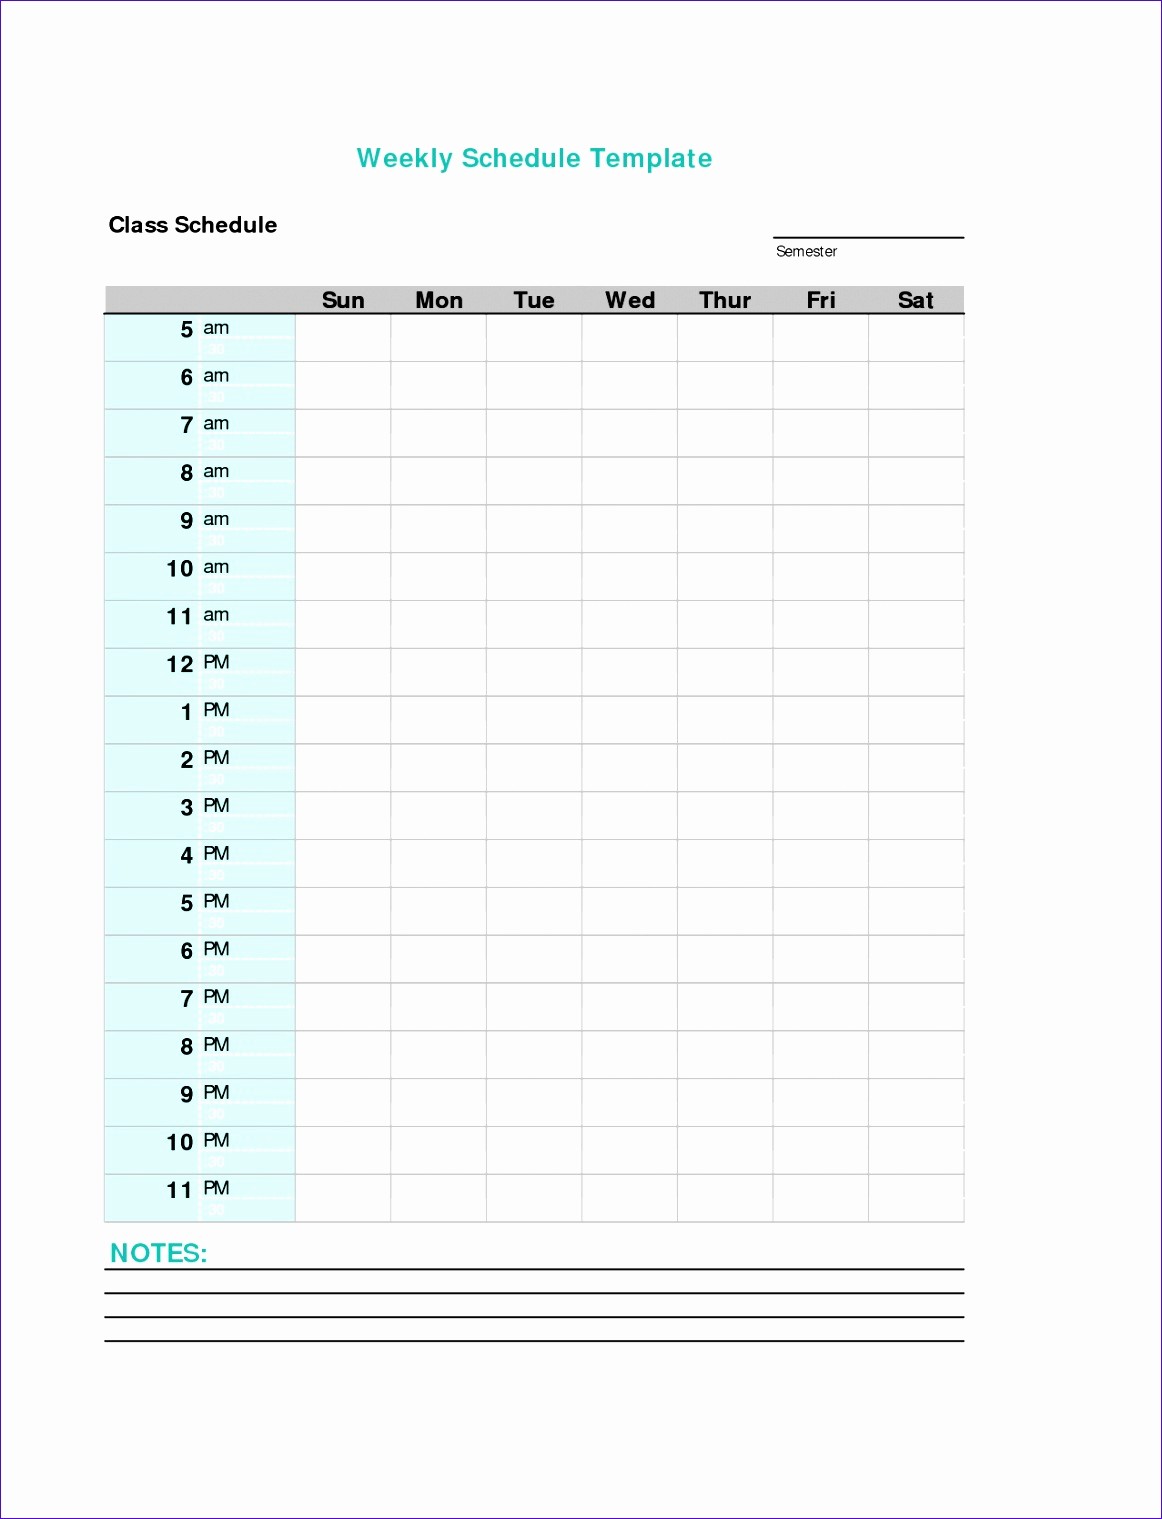 Microsoft Excel Weekly Schedule Template Lovely 11 Microsoft Excel Graph Templates Exceltemplates